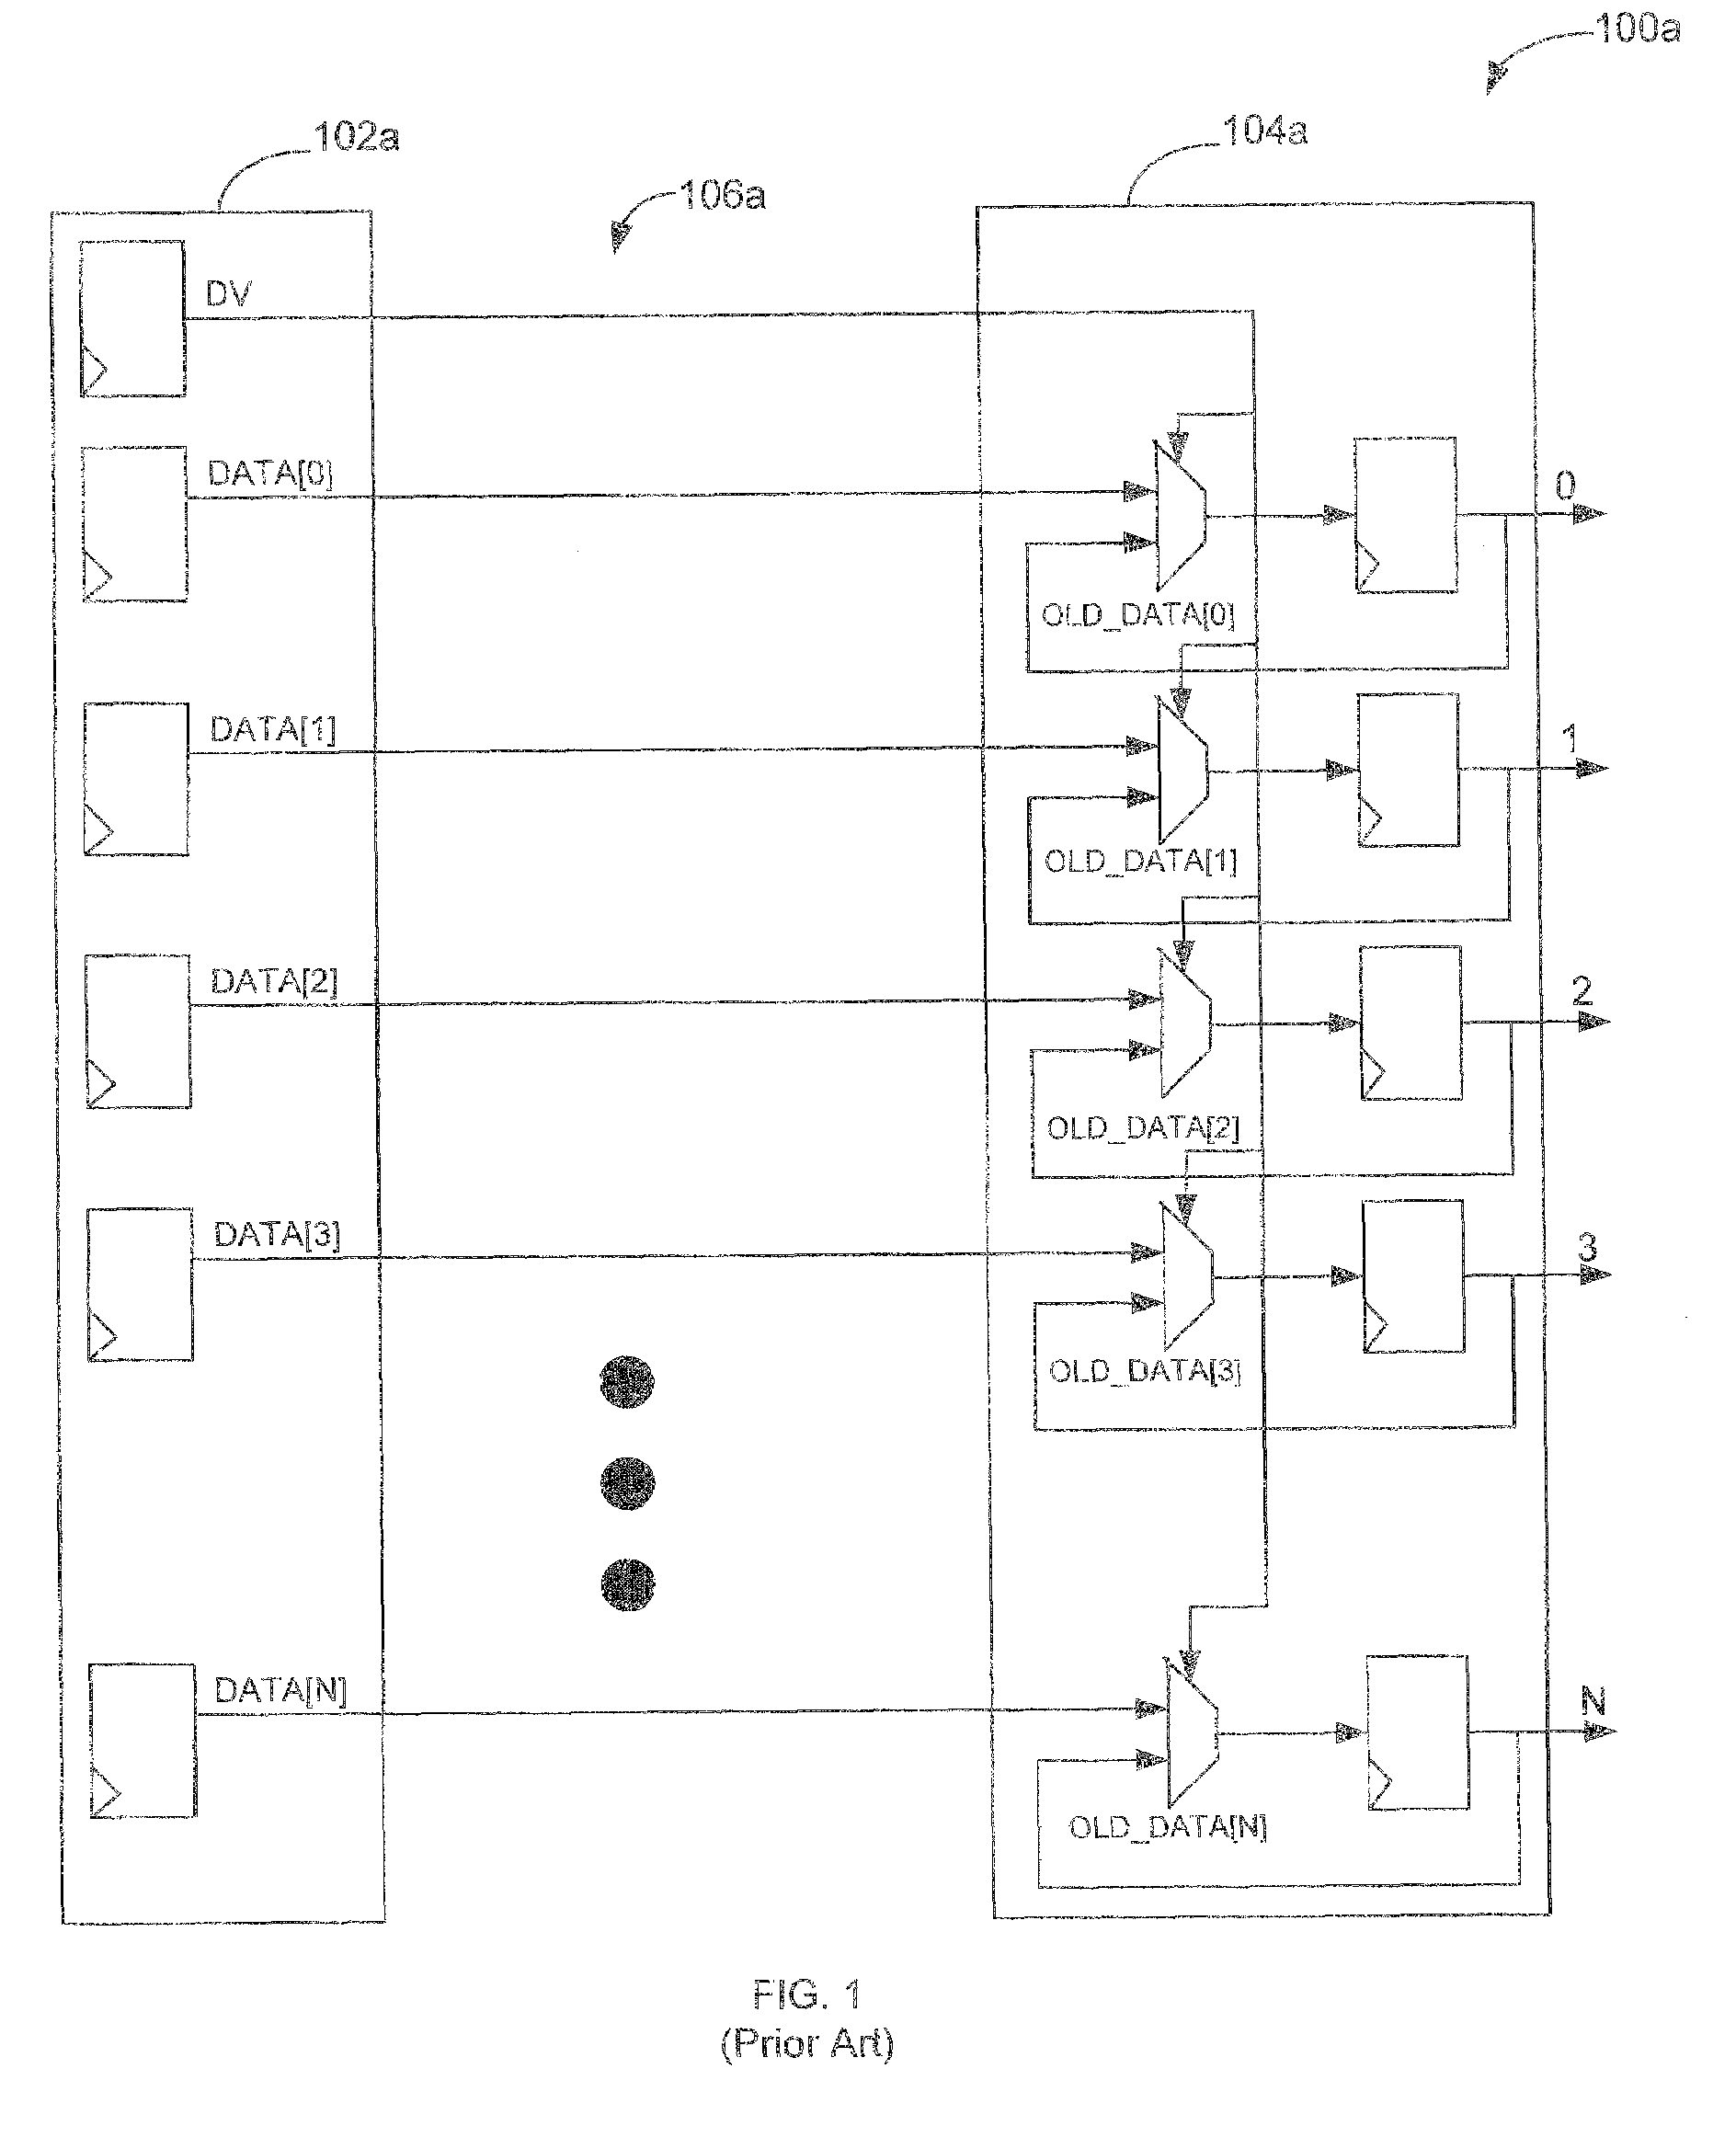 Method and system for detecting transmitter errors